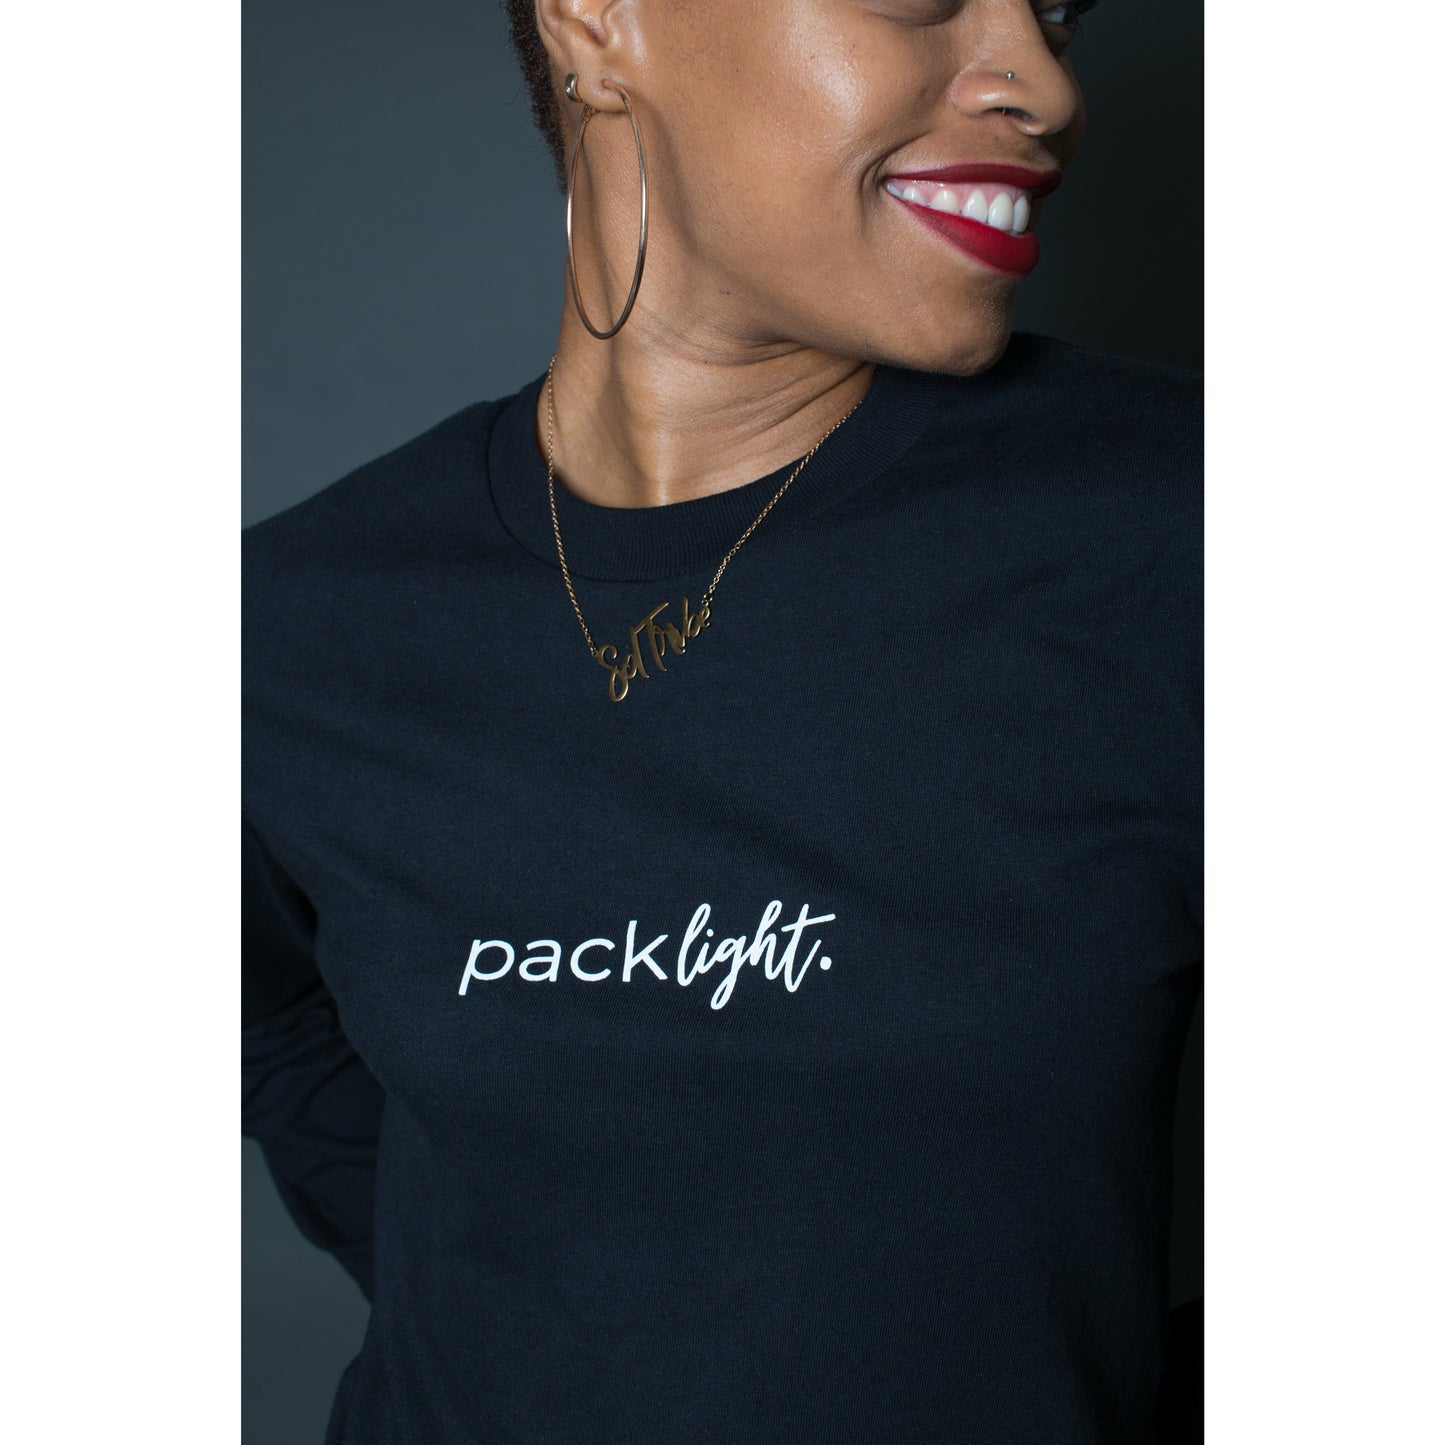 smiling woman model wearing black affirmation tee that says Pack Light on the sleeve and front of the tee by Sol Rise Essentials